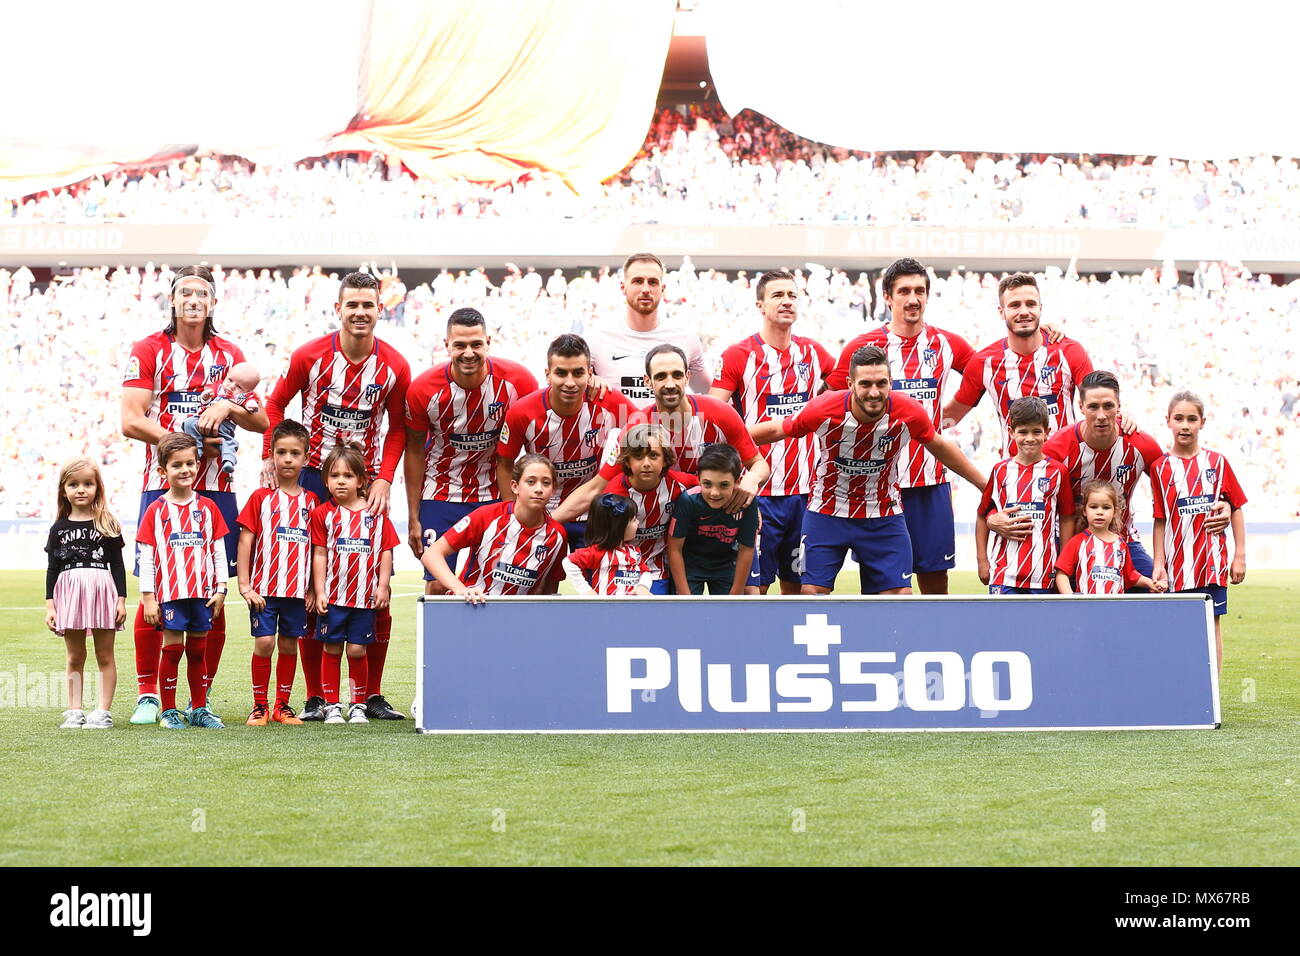 Atletico de madrid team group hi-res stock photography and images - Alamy